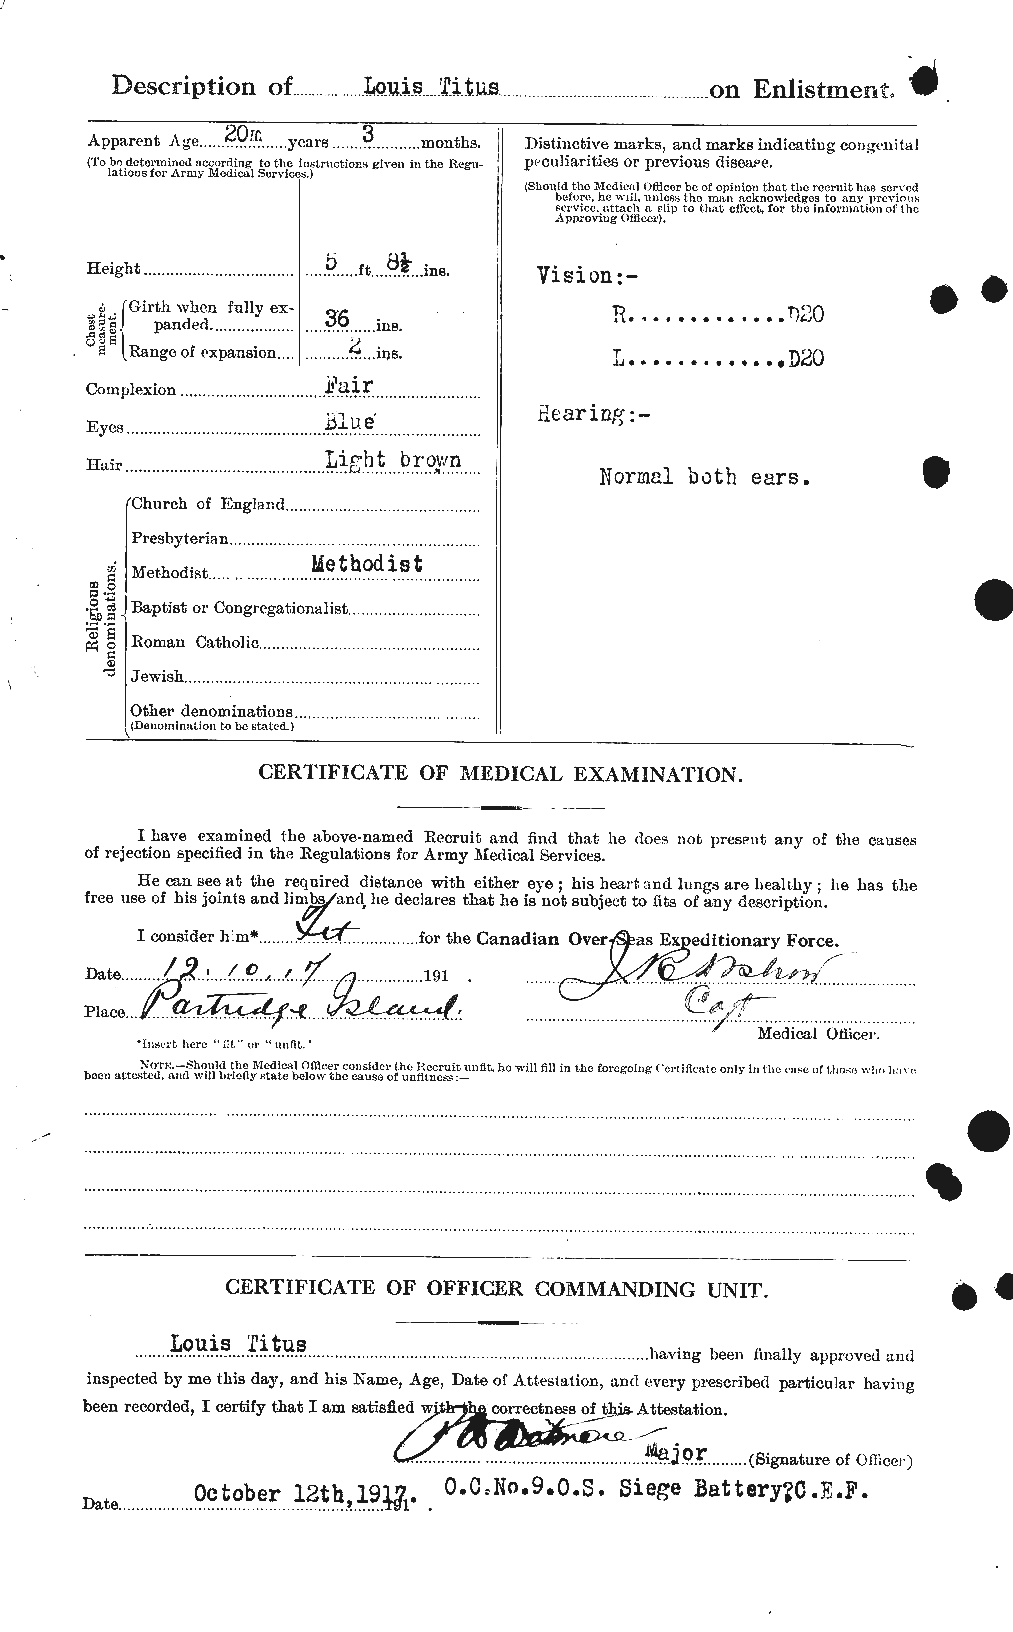 Personnel Records of the First World War - CEF 634976b